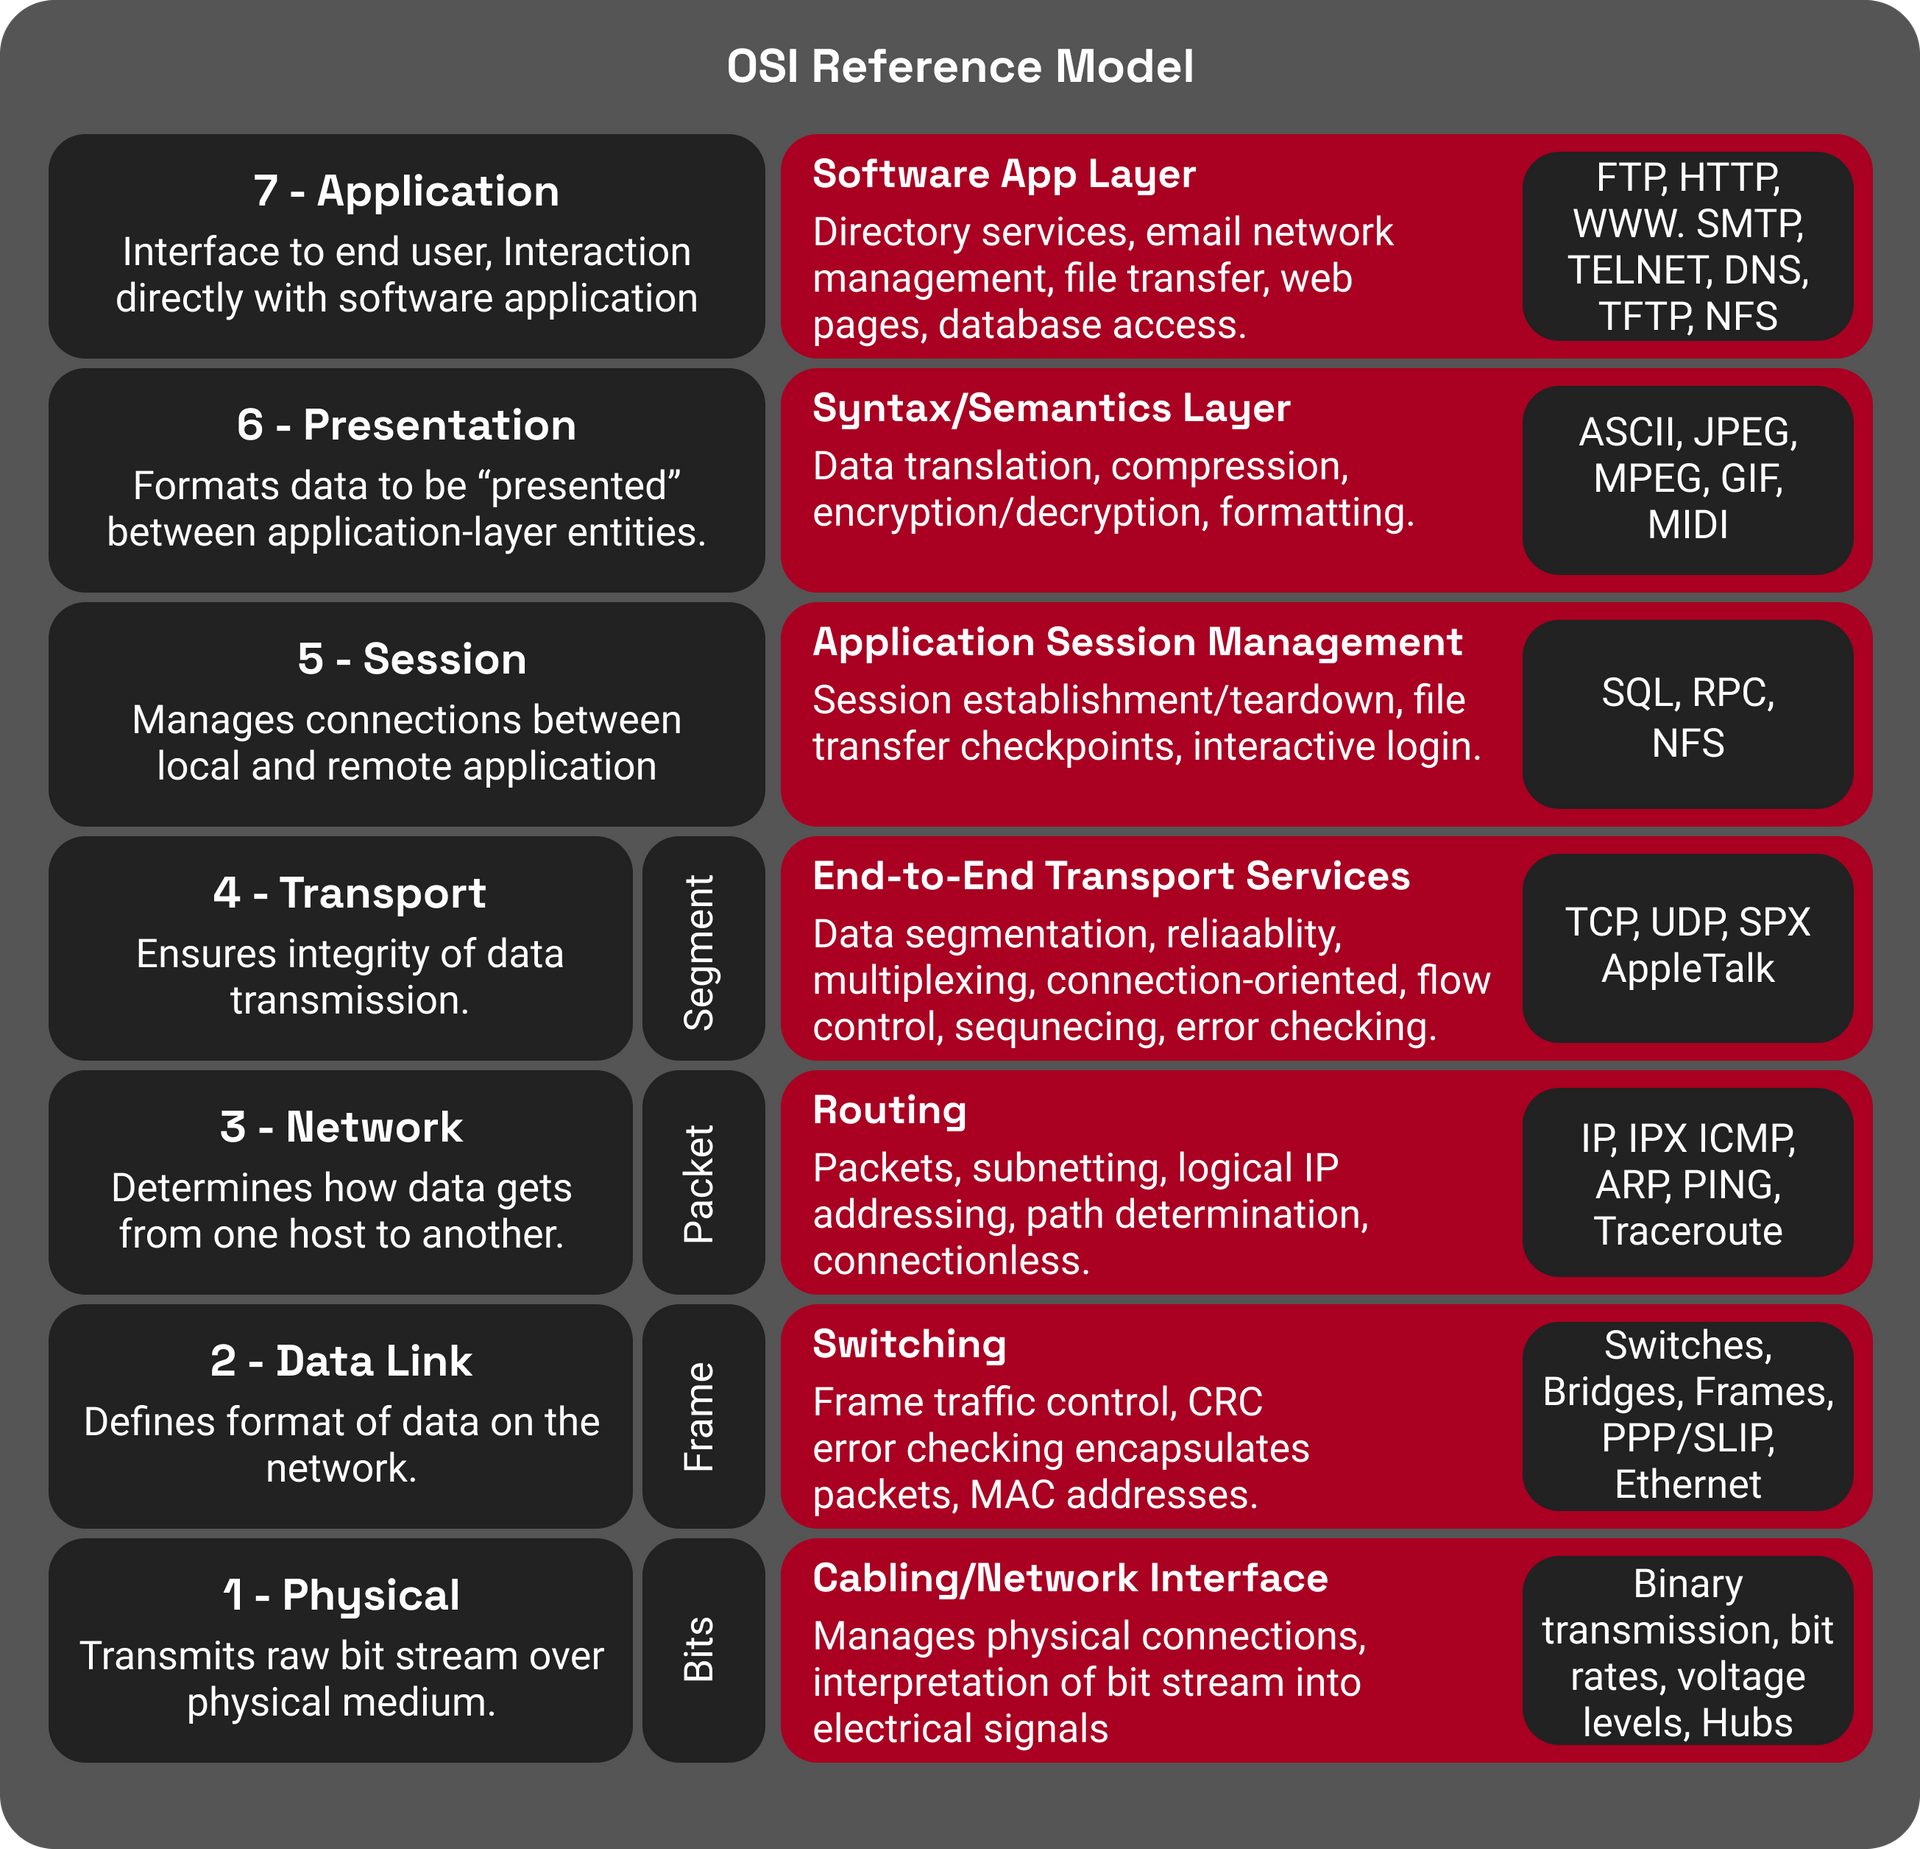 OSI Reference Model by Threat Intelligence